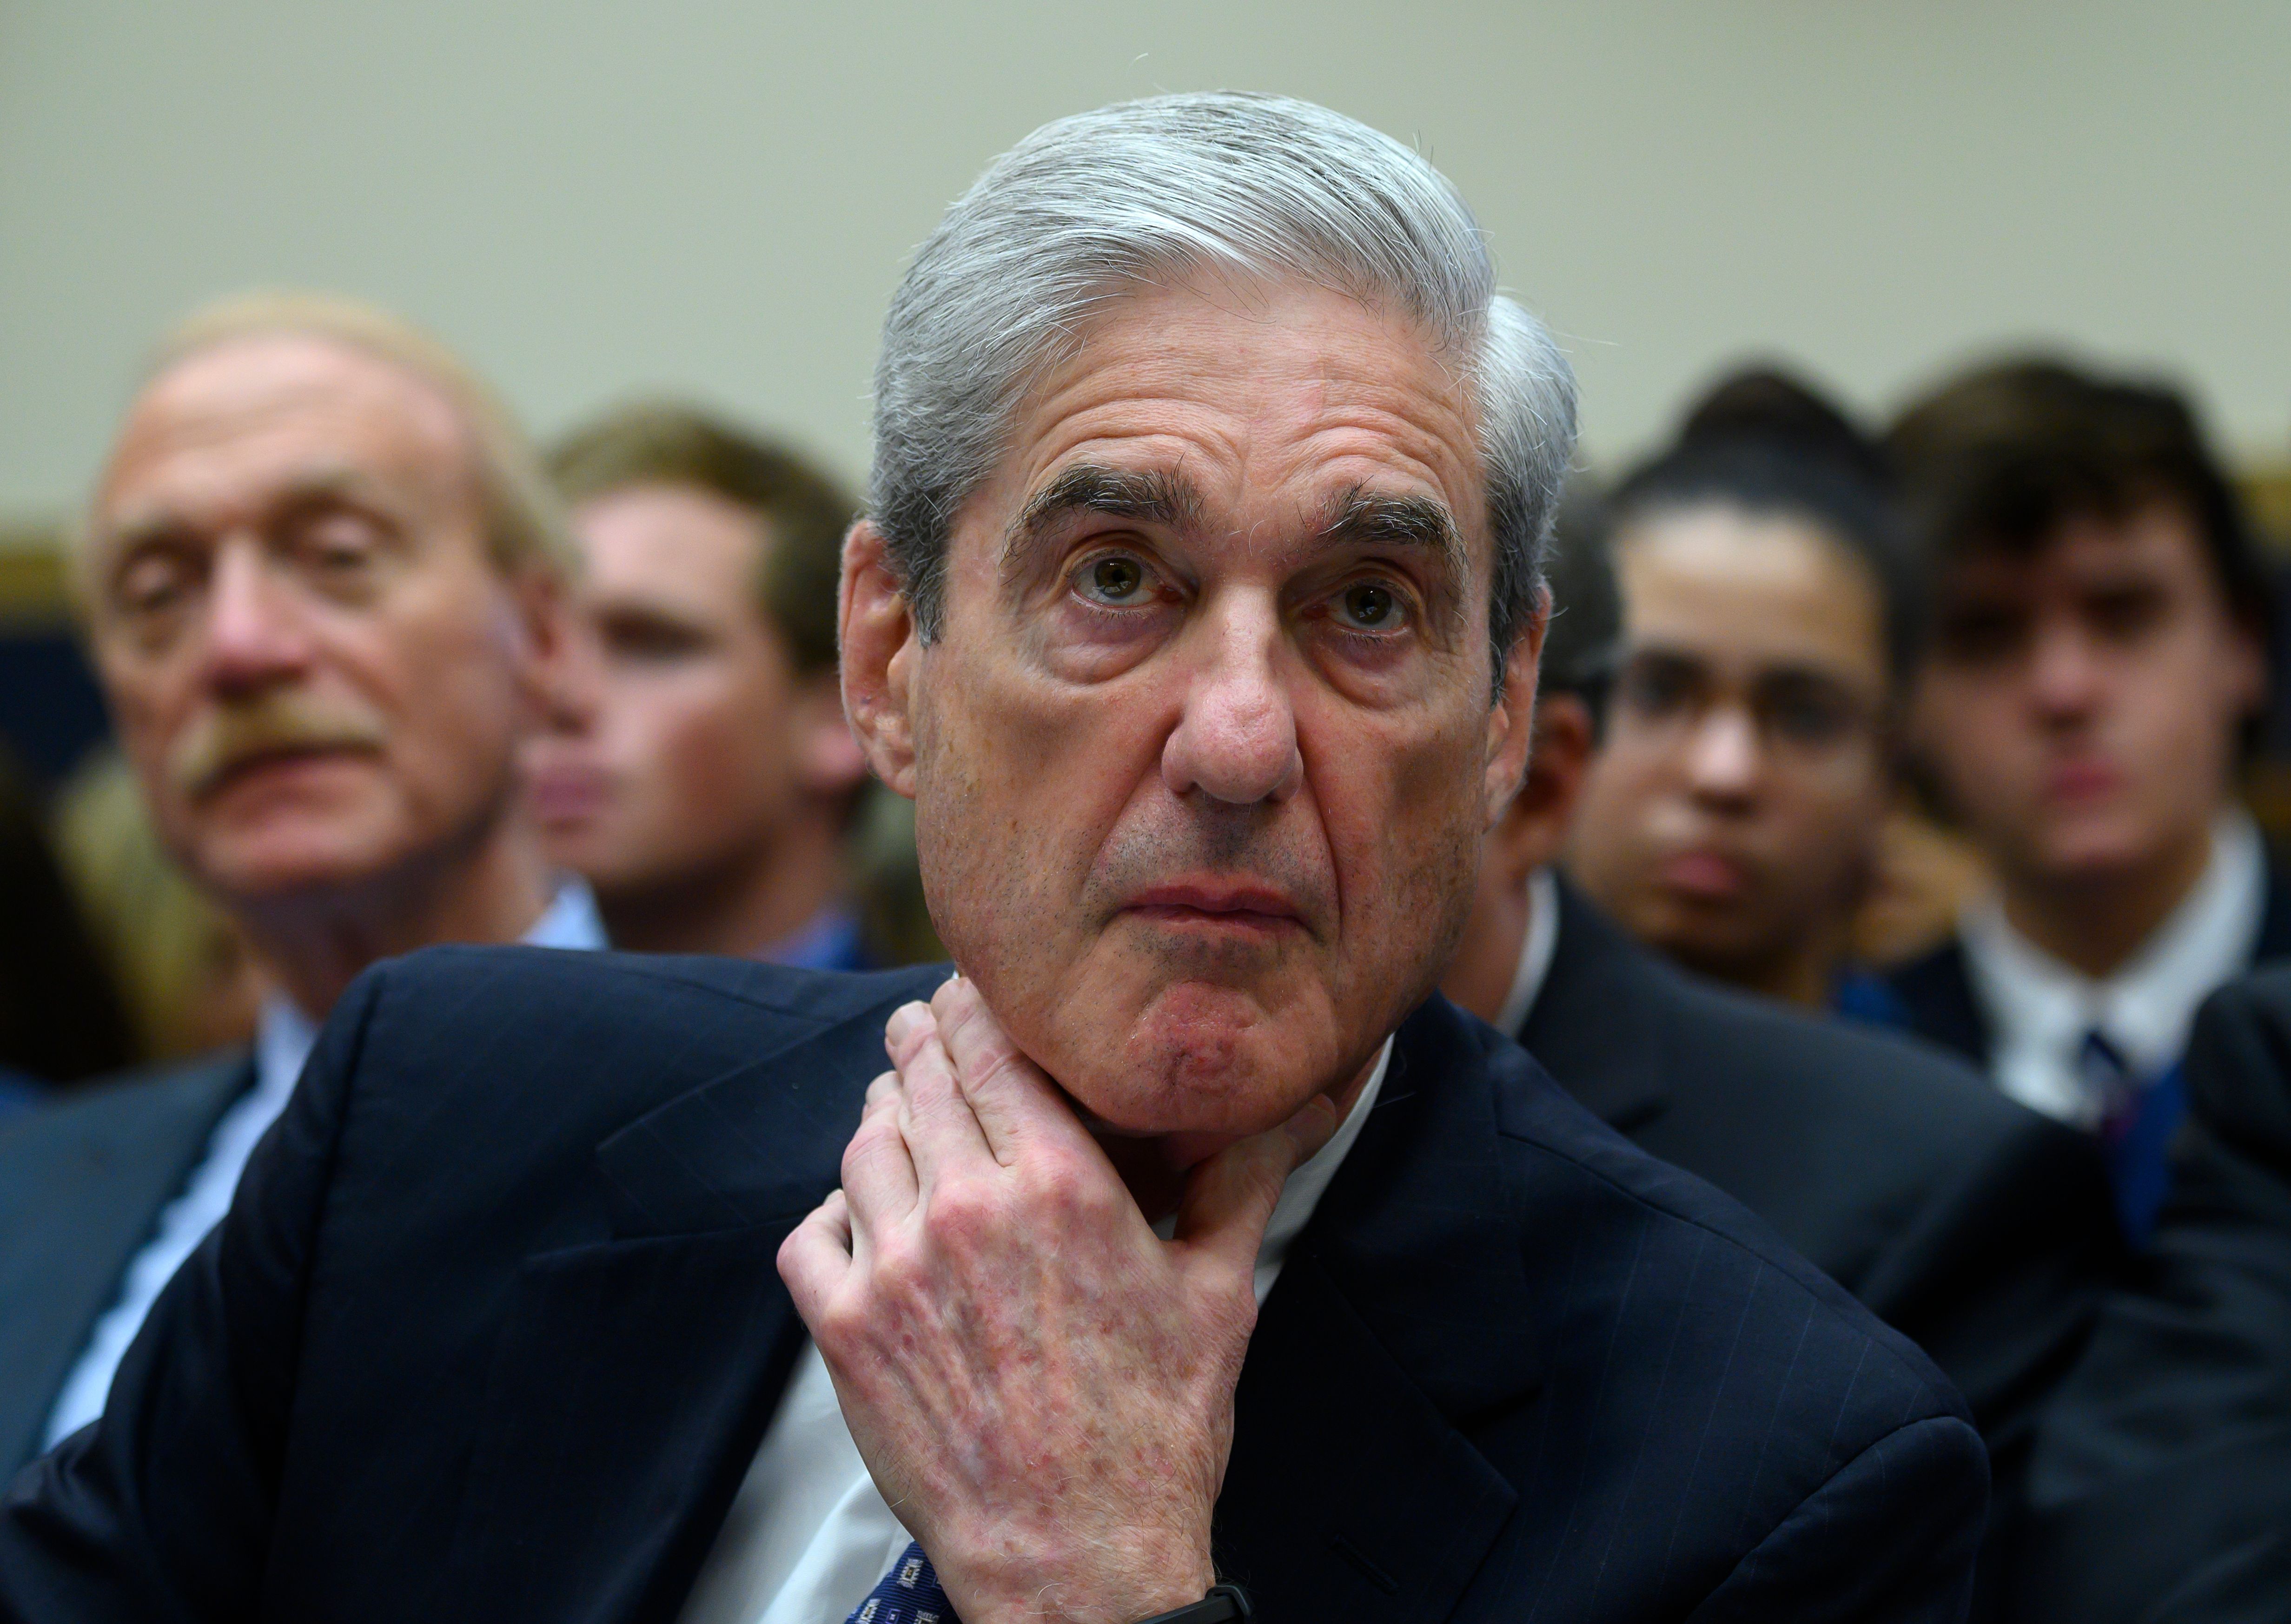 Former Special Counsel Robert Mueller testifies before the House Select Committee on Intelligence hearing on Capitol Hill in Washington, DC, July 24, 2019. (Photo by ANDREW CABALLERO-REYNOLDS / AFP/ Getty Images)